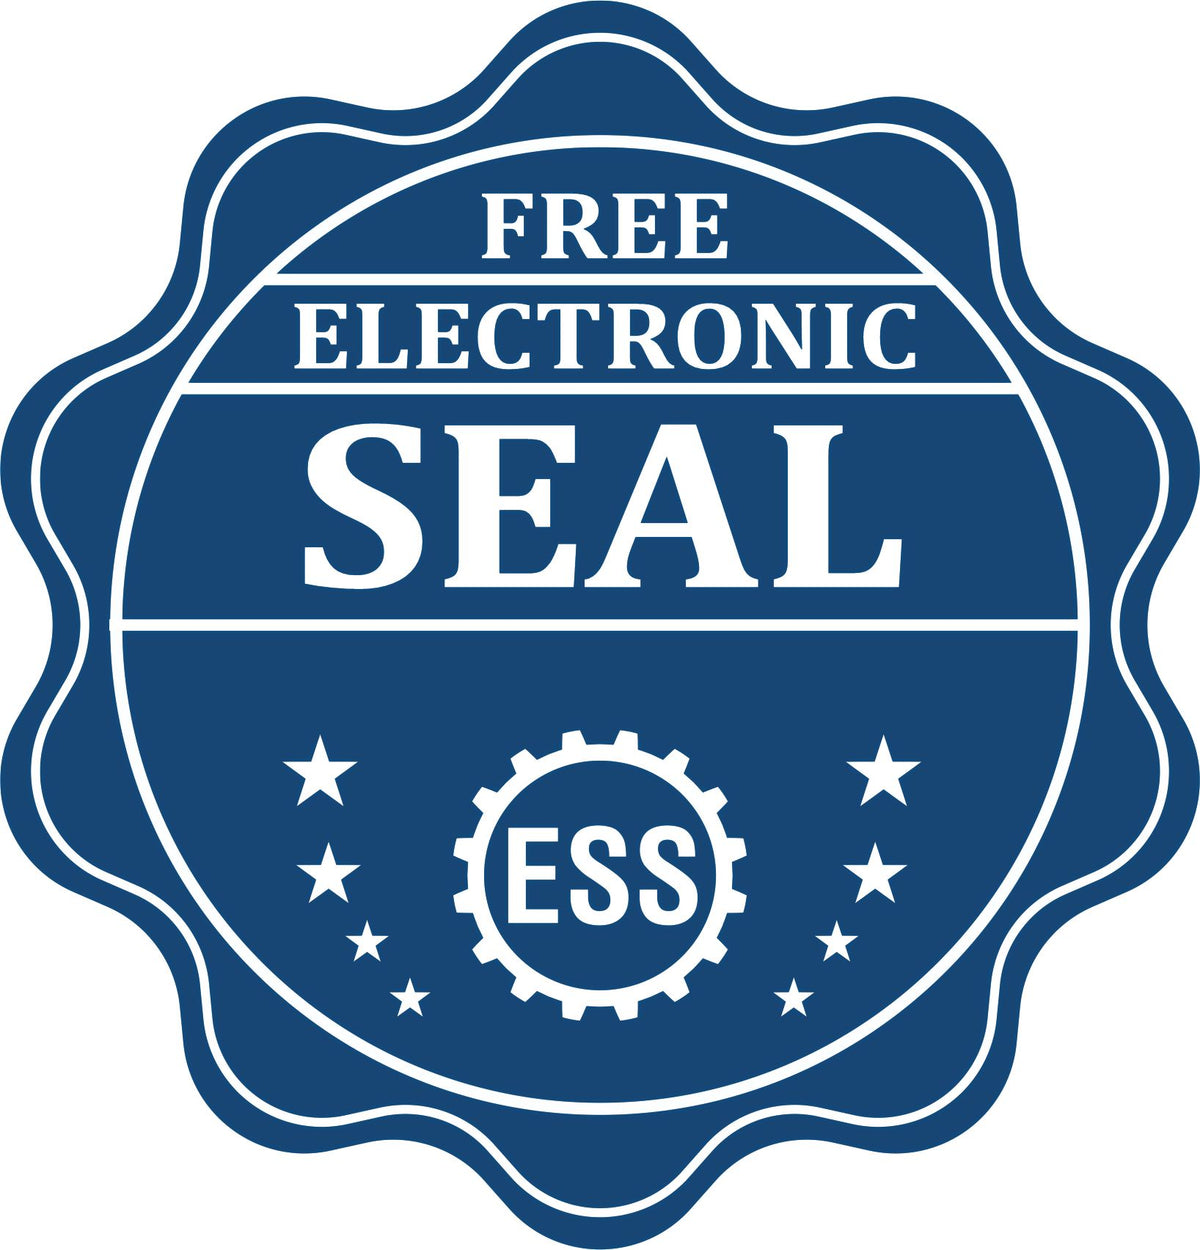 A badge showing a free electronic seal for the Hybrid Massachusetts Geologist Seal with stars and the ESS gear on the emblem.